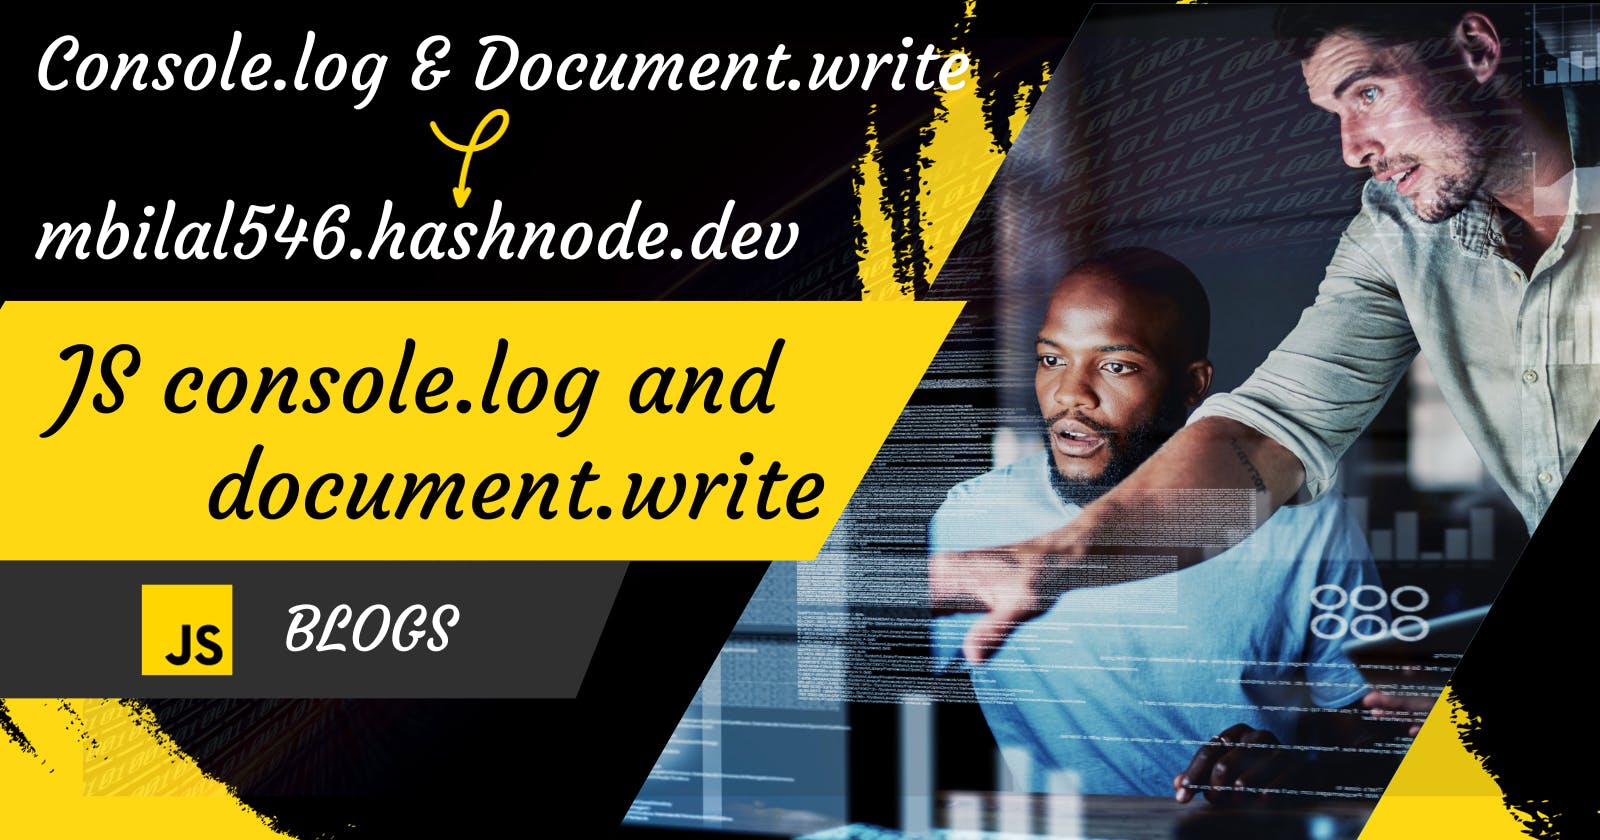 What are console.log and document.write in JavaScript?